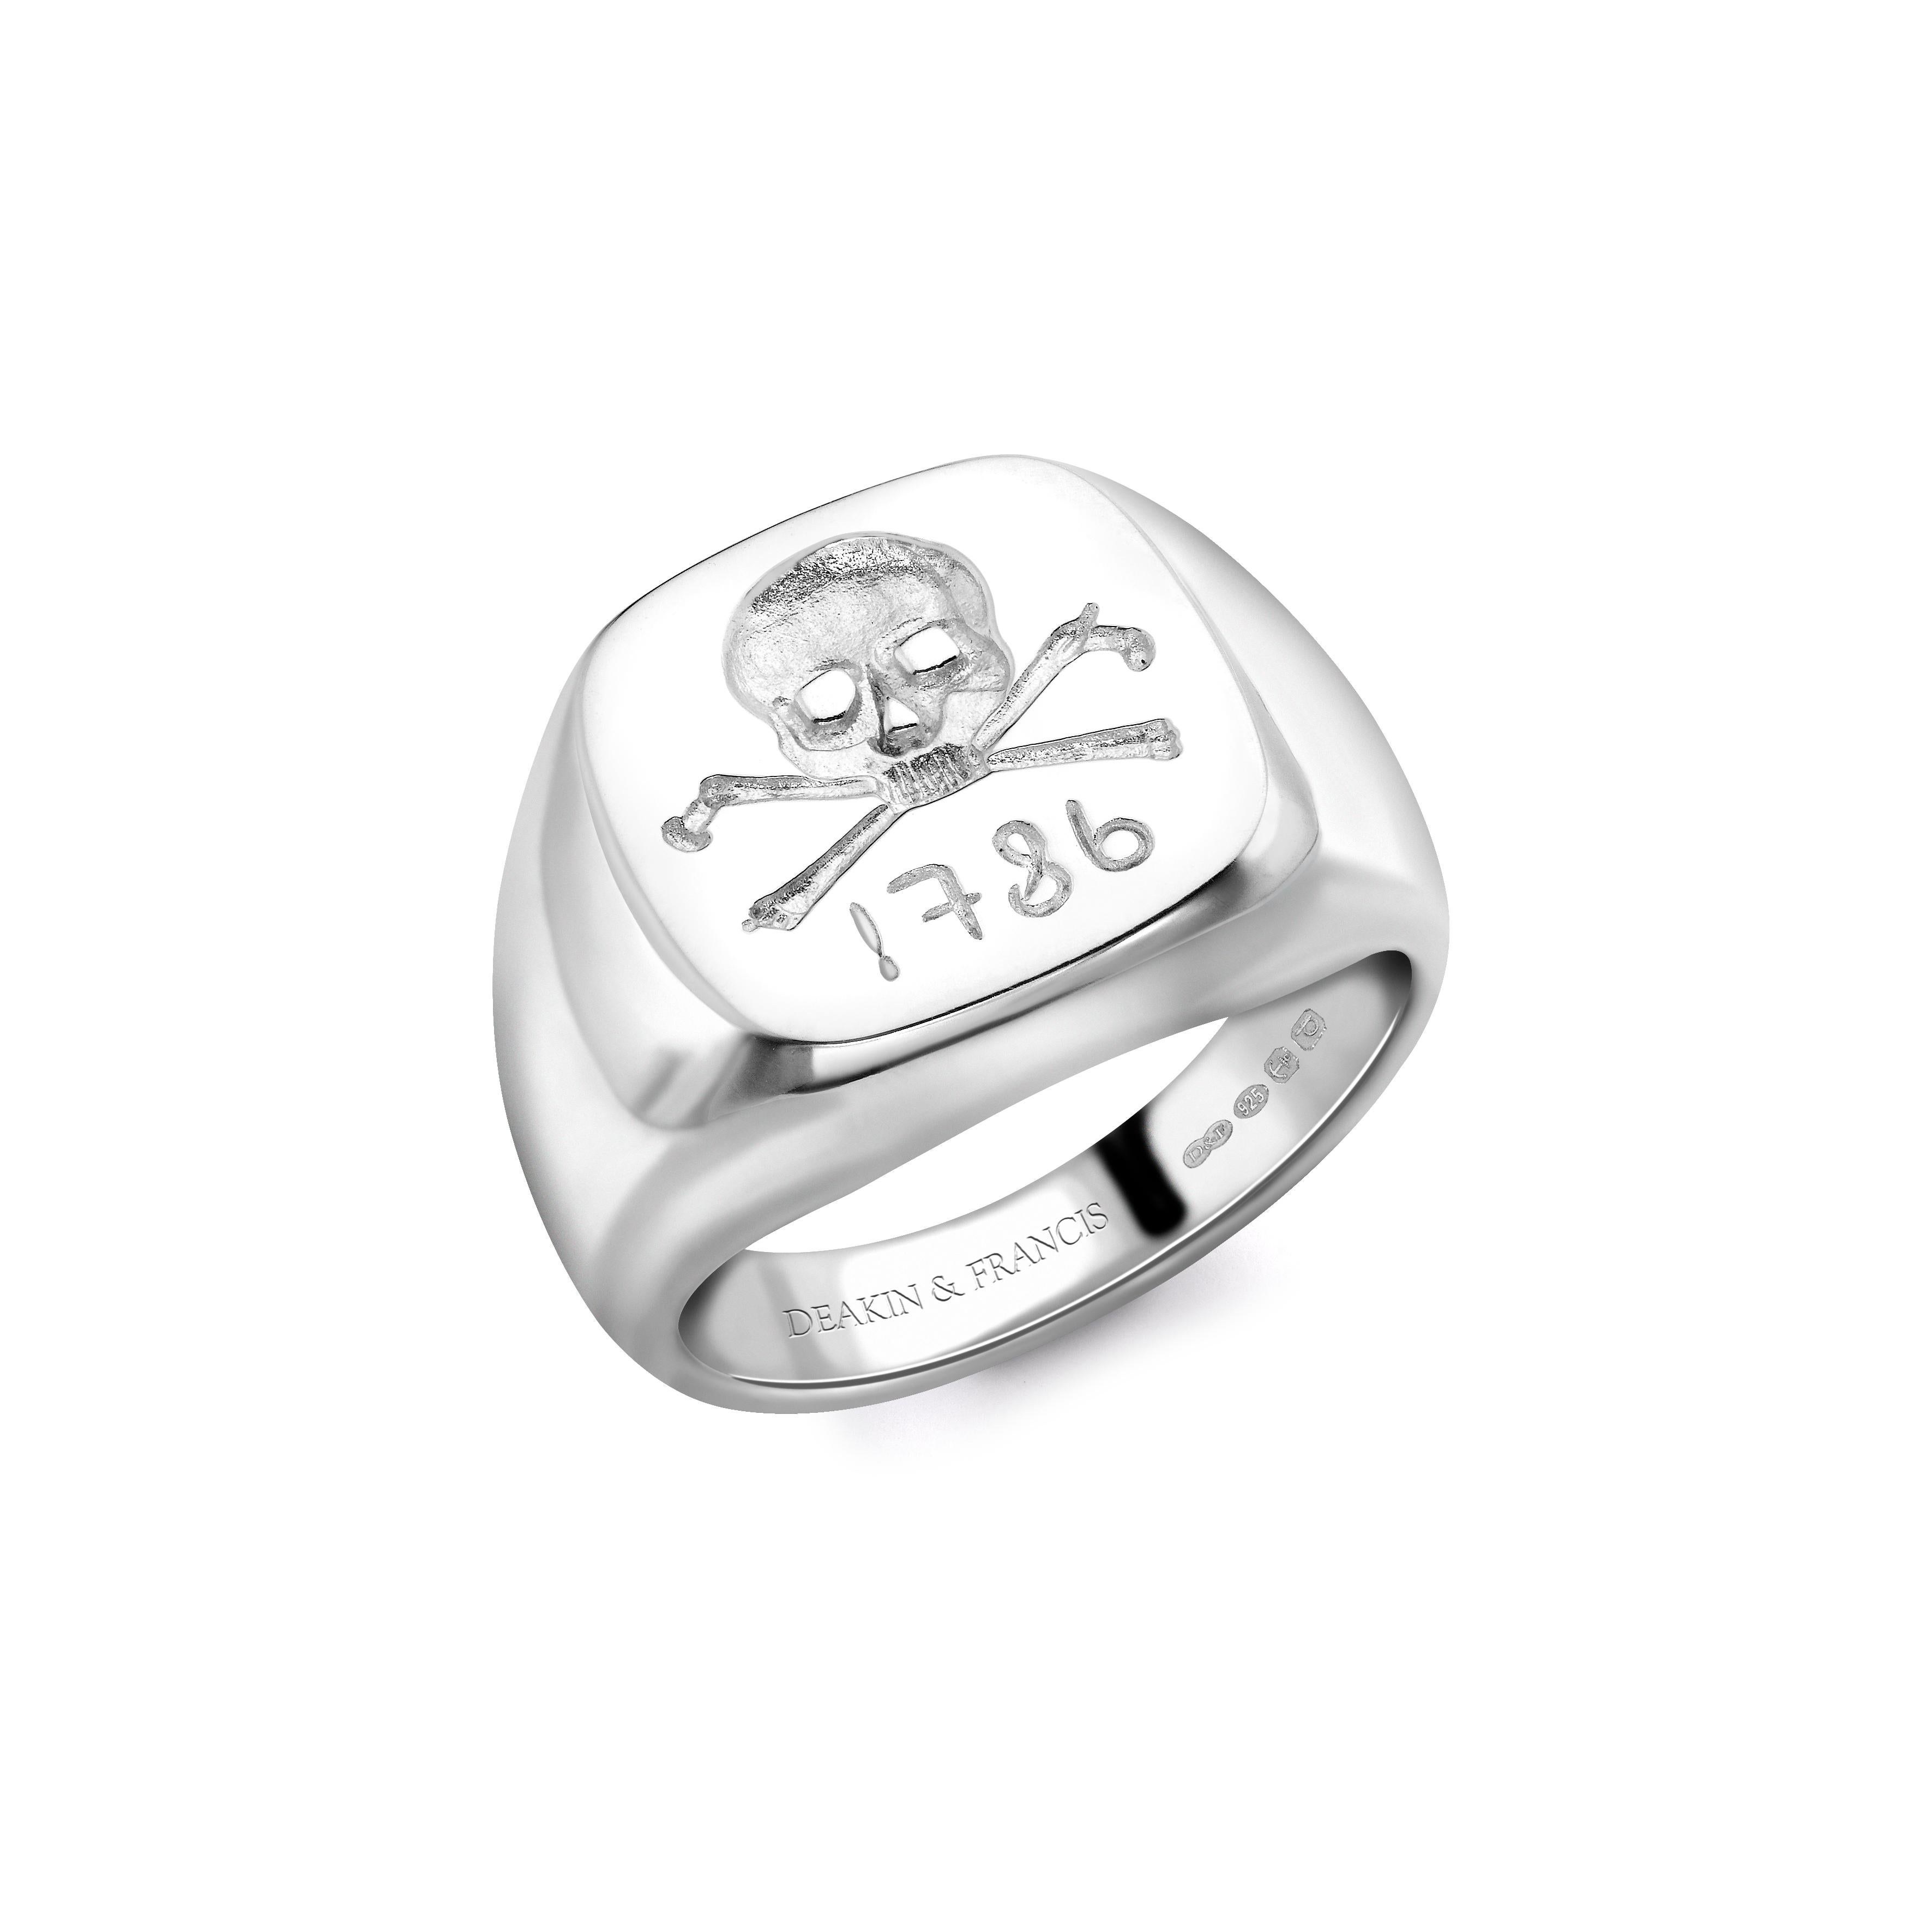 DEAKIN & FRANCIS, Piccadilly Arcade, London

Signet Rings are timeless heirlooms to have and to hold and this ring is a real statement piece.

This Signet Ring has been given a contemporary twist. Hand-stamped with the iconic Deakin & Francis skull